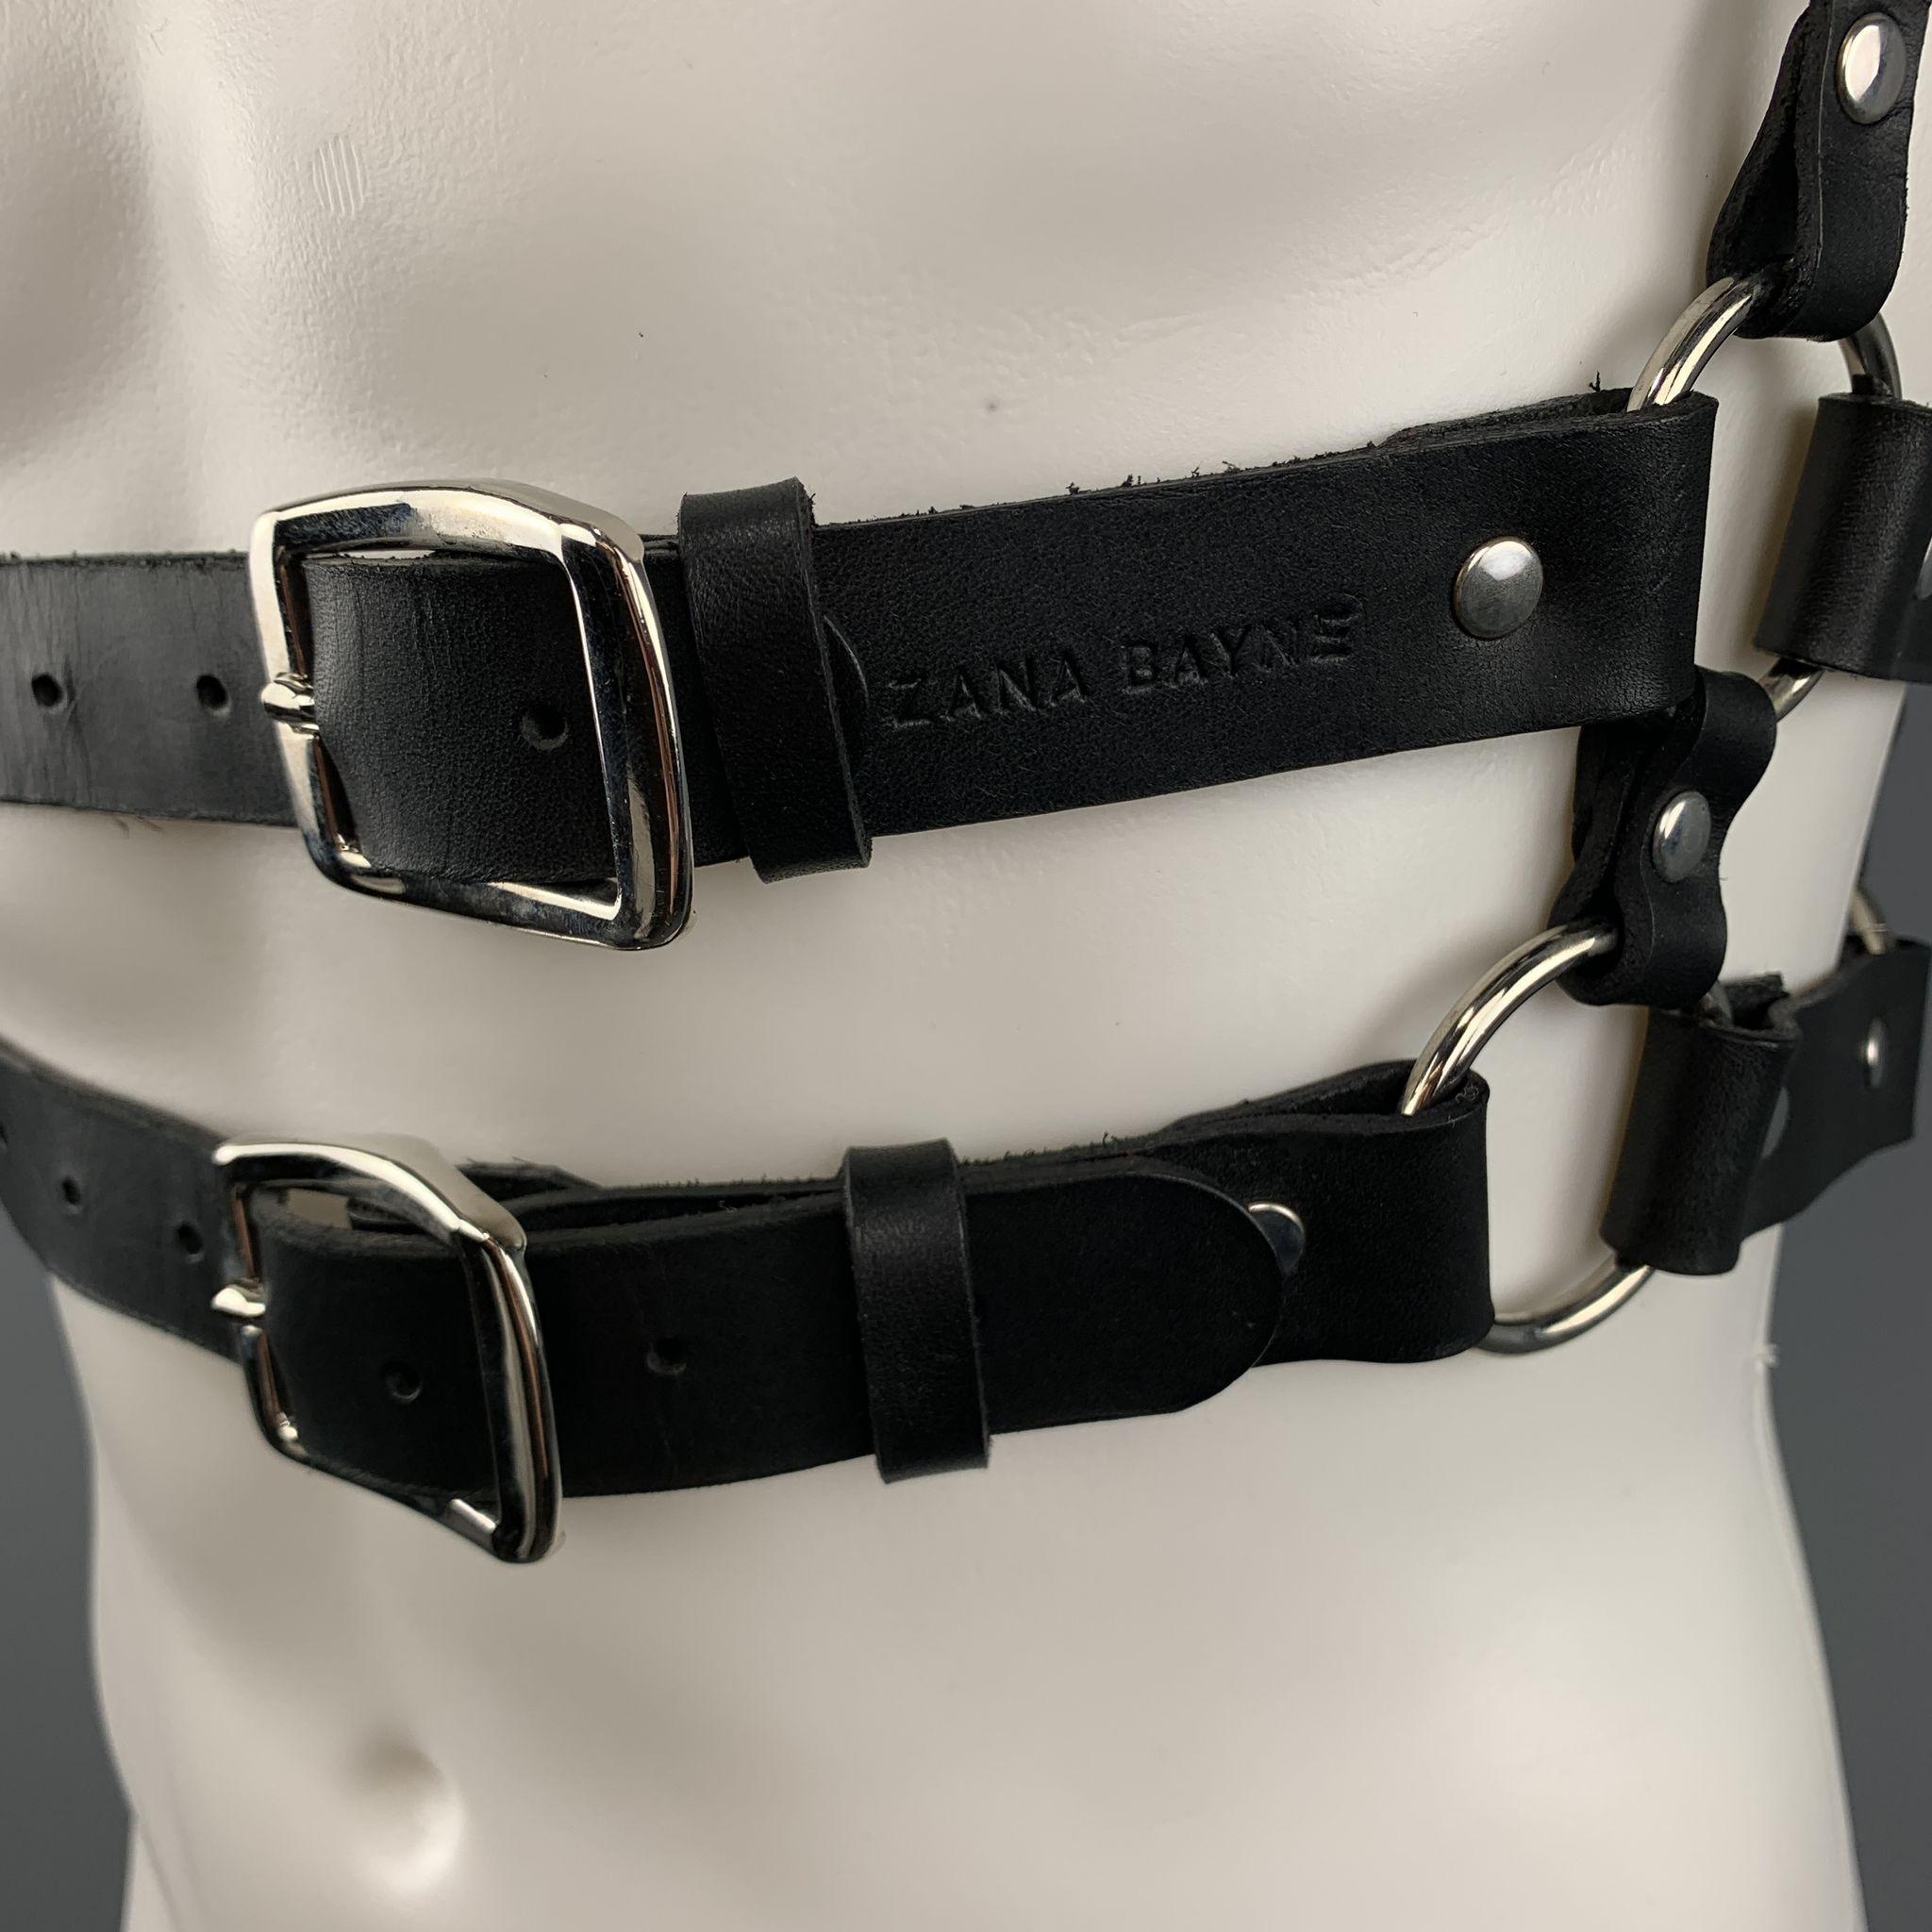 ZANA BAYNE harness comes in black leather with silver tone hardware, double waistband, and studded back 